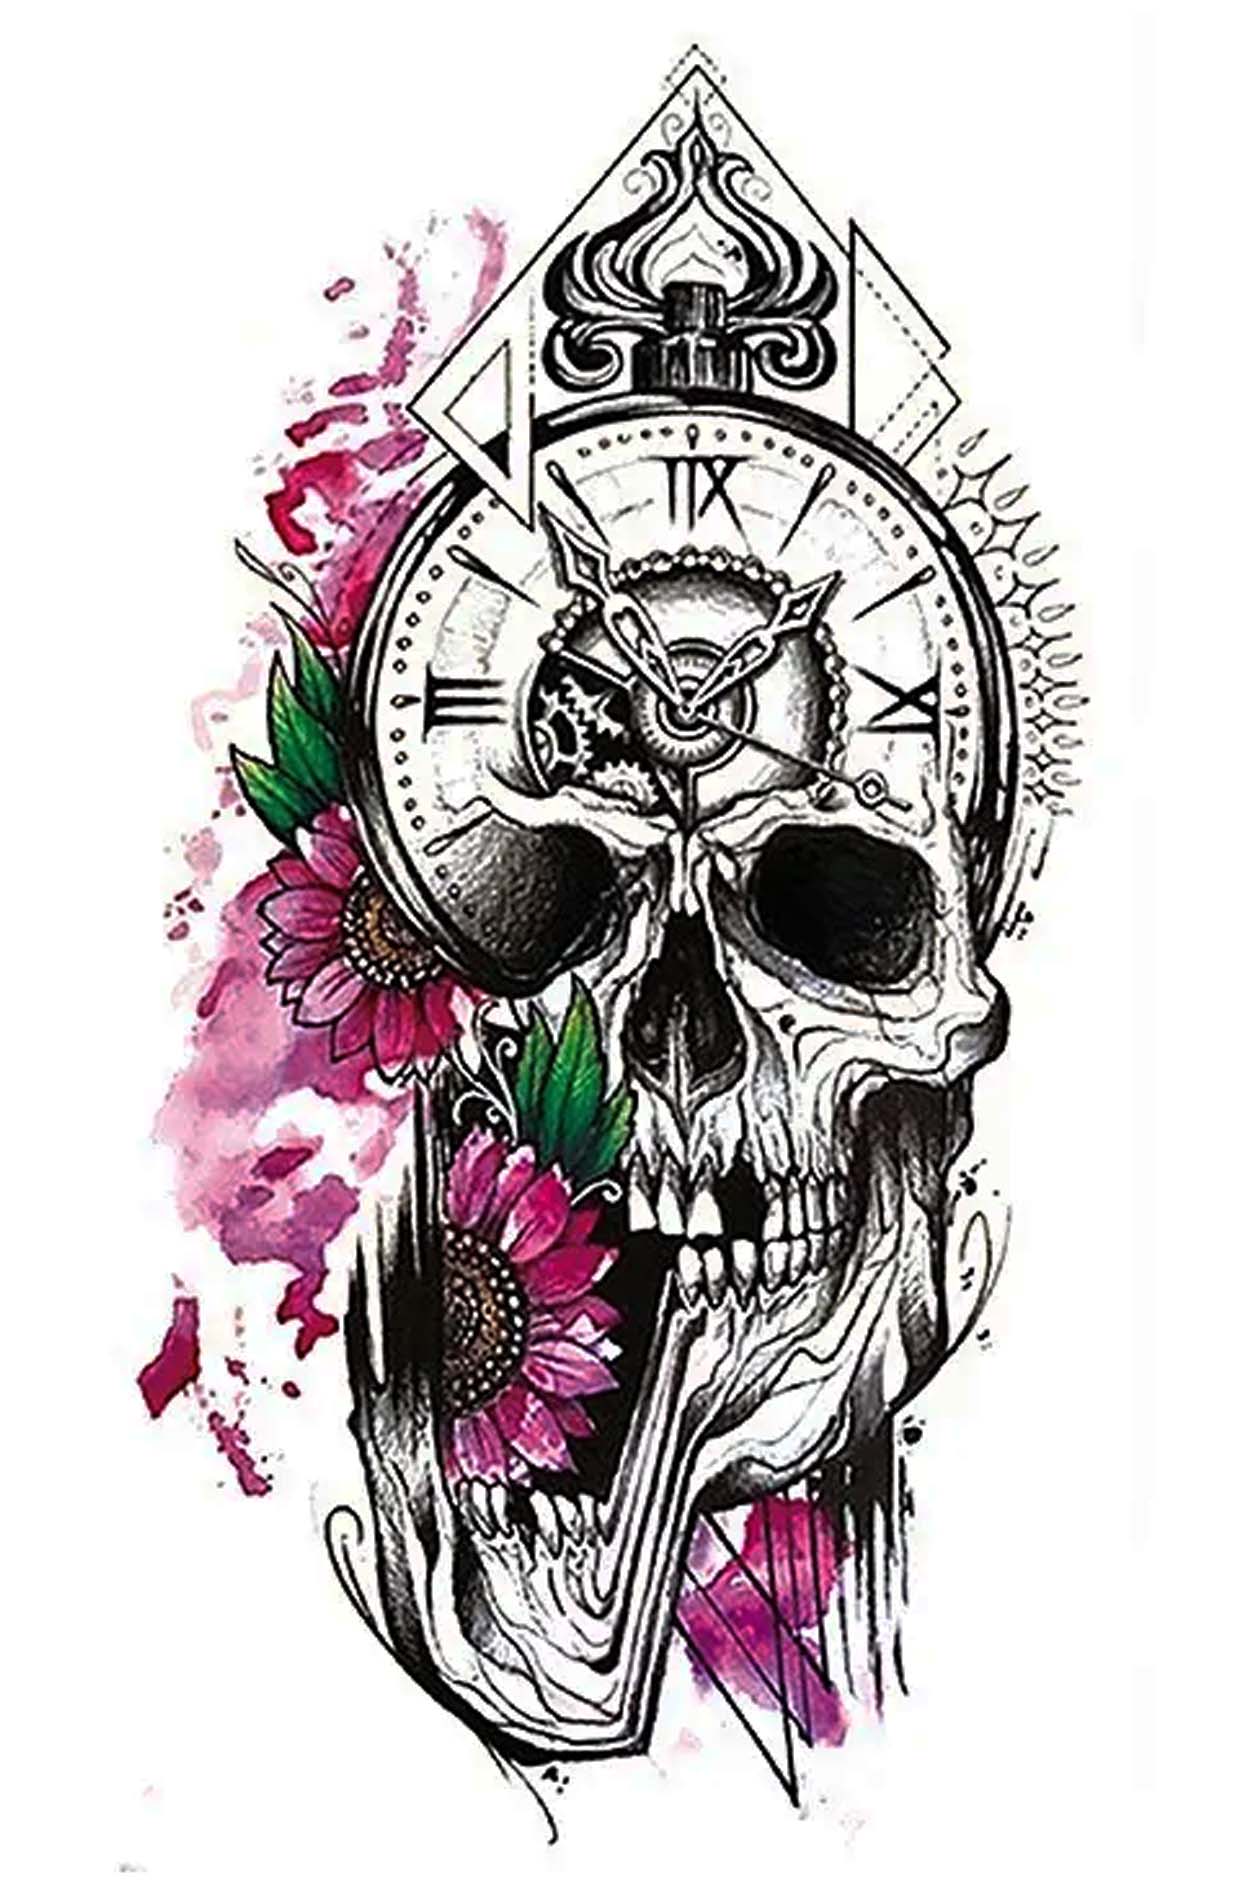 There is an ever-present struggle between life and death, and the clock is always ticking. This beautiful fake tag has happy pink flowers surrounding the clock and skull, reminding us of life’s preciousness. Enjoy this artistic tag on an arm, leg, or chest. Colors are black and deep rose artistically done. 